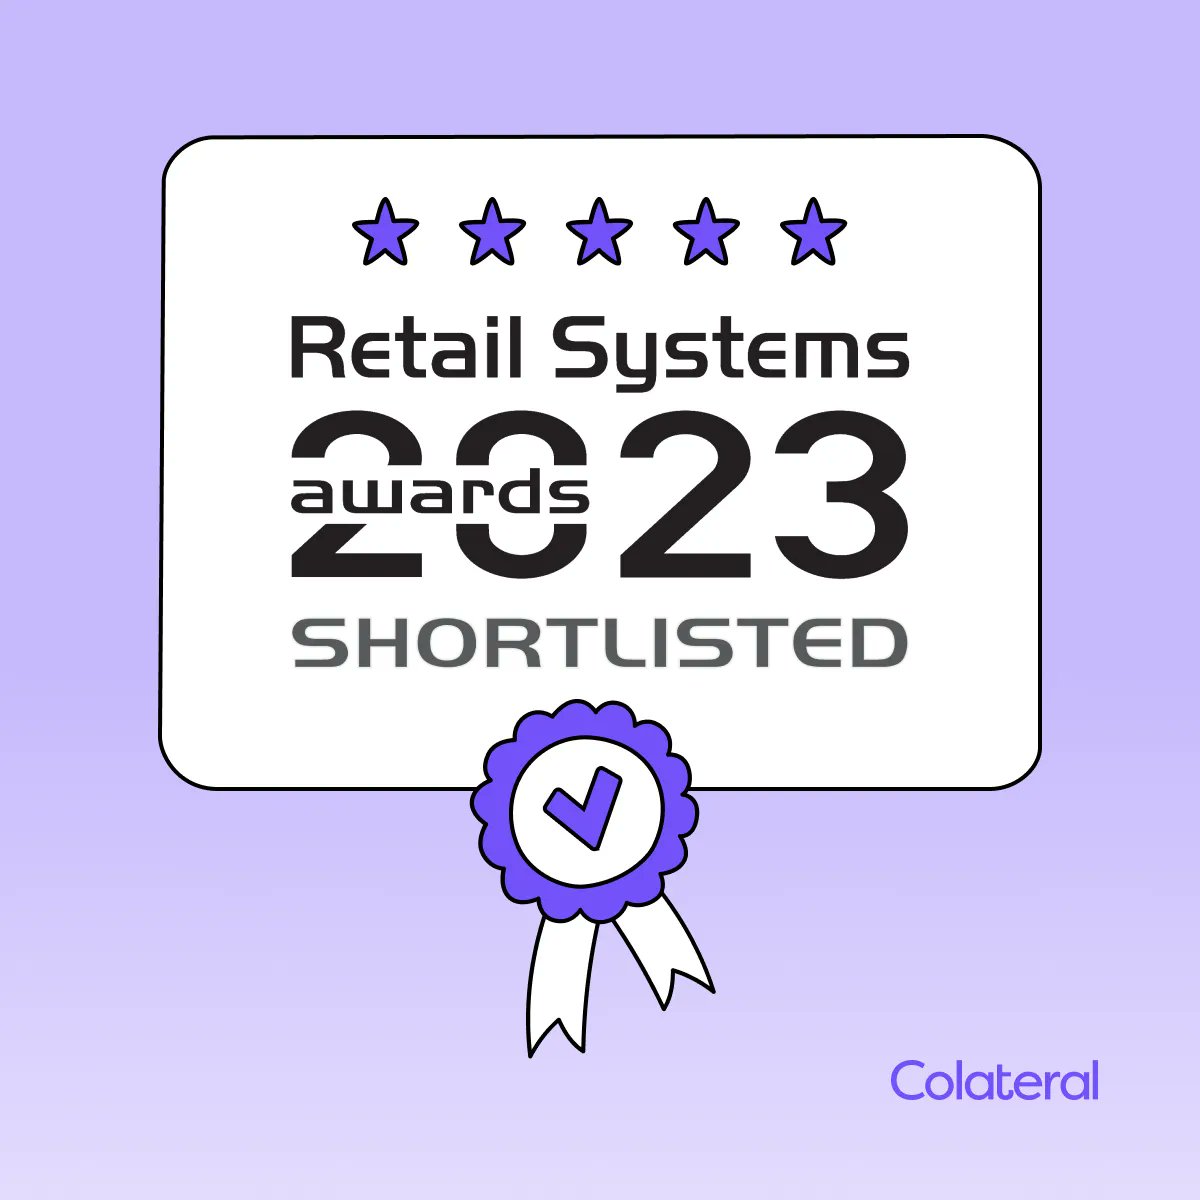 We're delighted to have been shortlisted for the In-Store Technology of the Year award for the upcoming Retail Systems Awards 2023!

We're looking forward to the awards announcement on June 29th!

#instoremarketing #innovation #awards